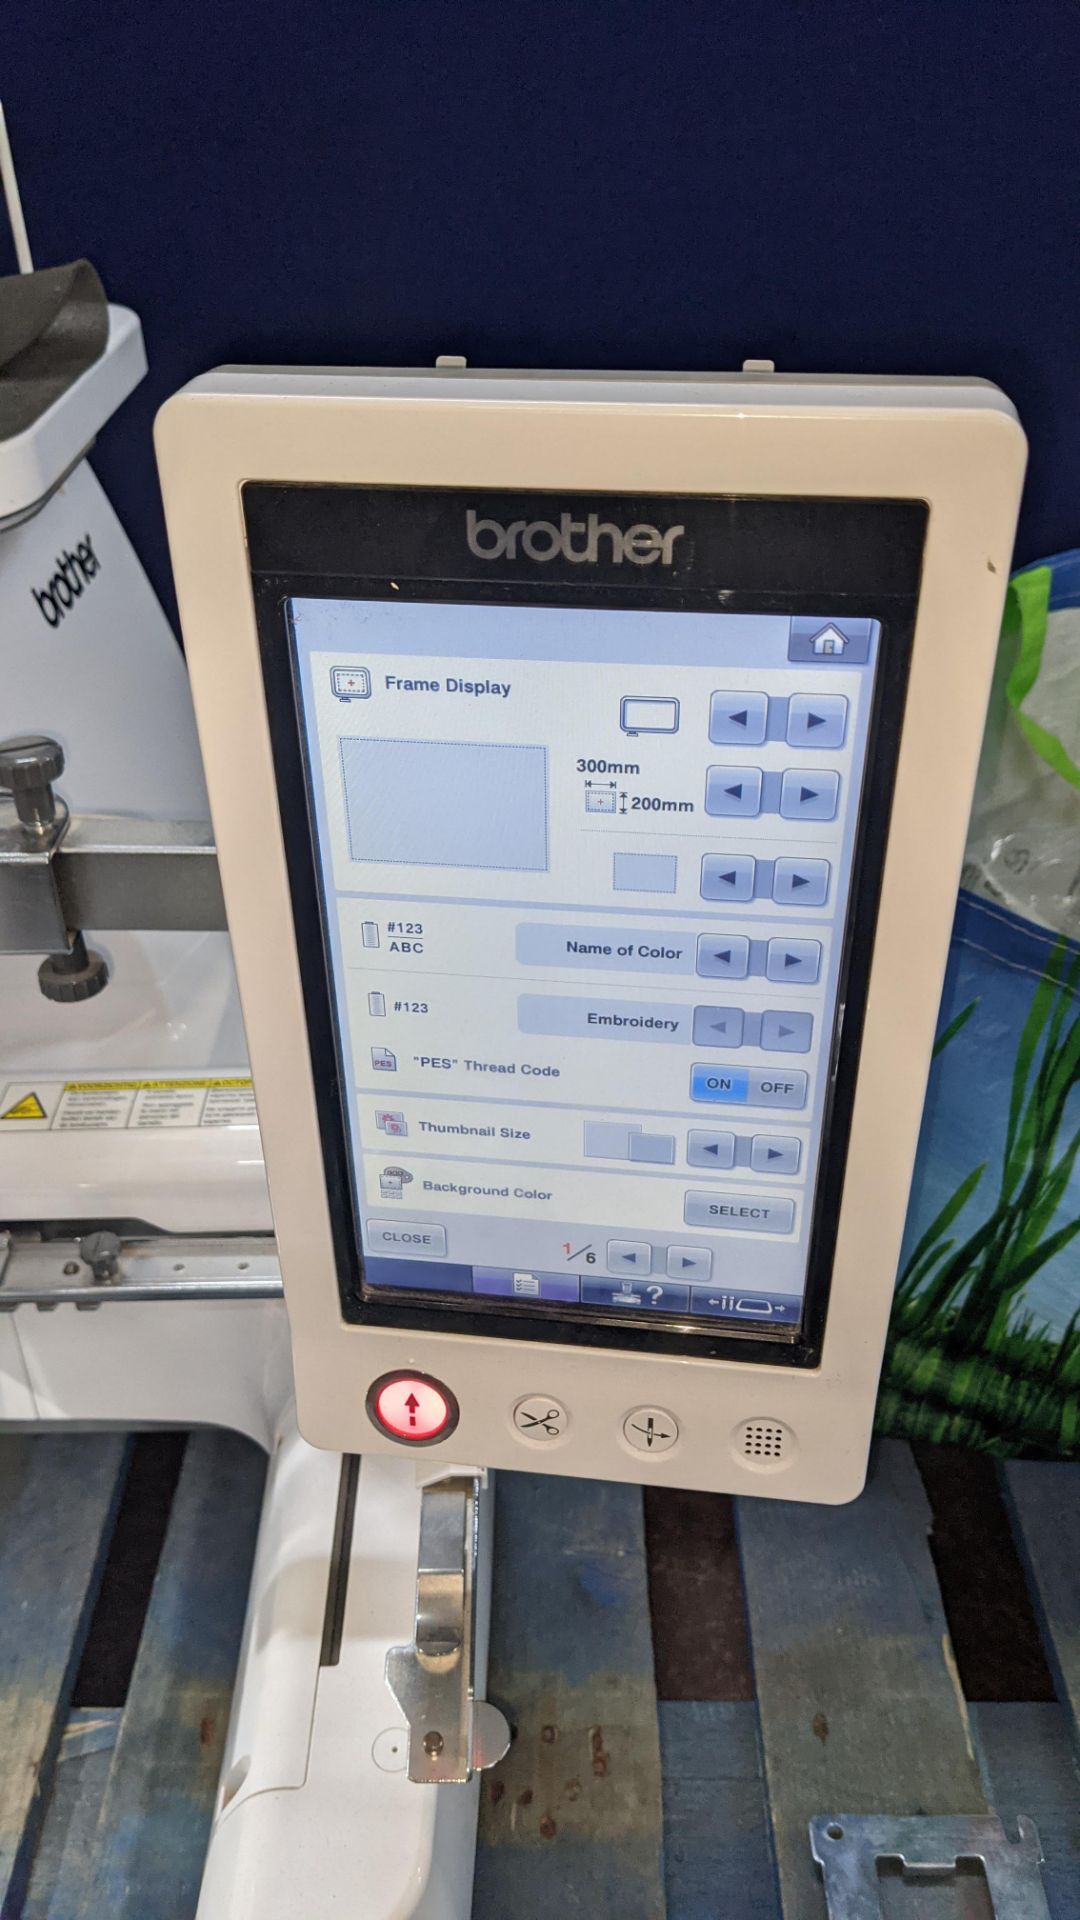 Brother PR655 single head 6 needle embroidery machine, serial no. E72364-D6B113501 incorporating lar - Image 10 of 25